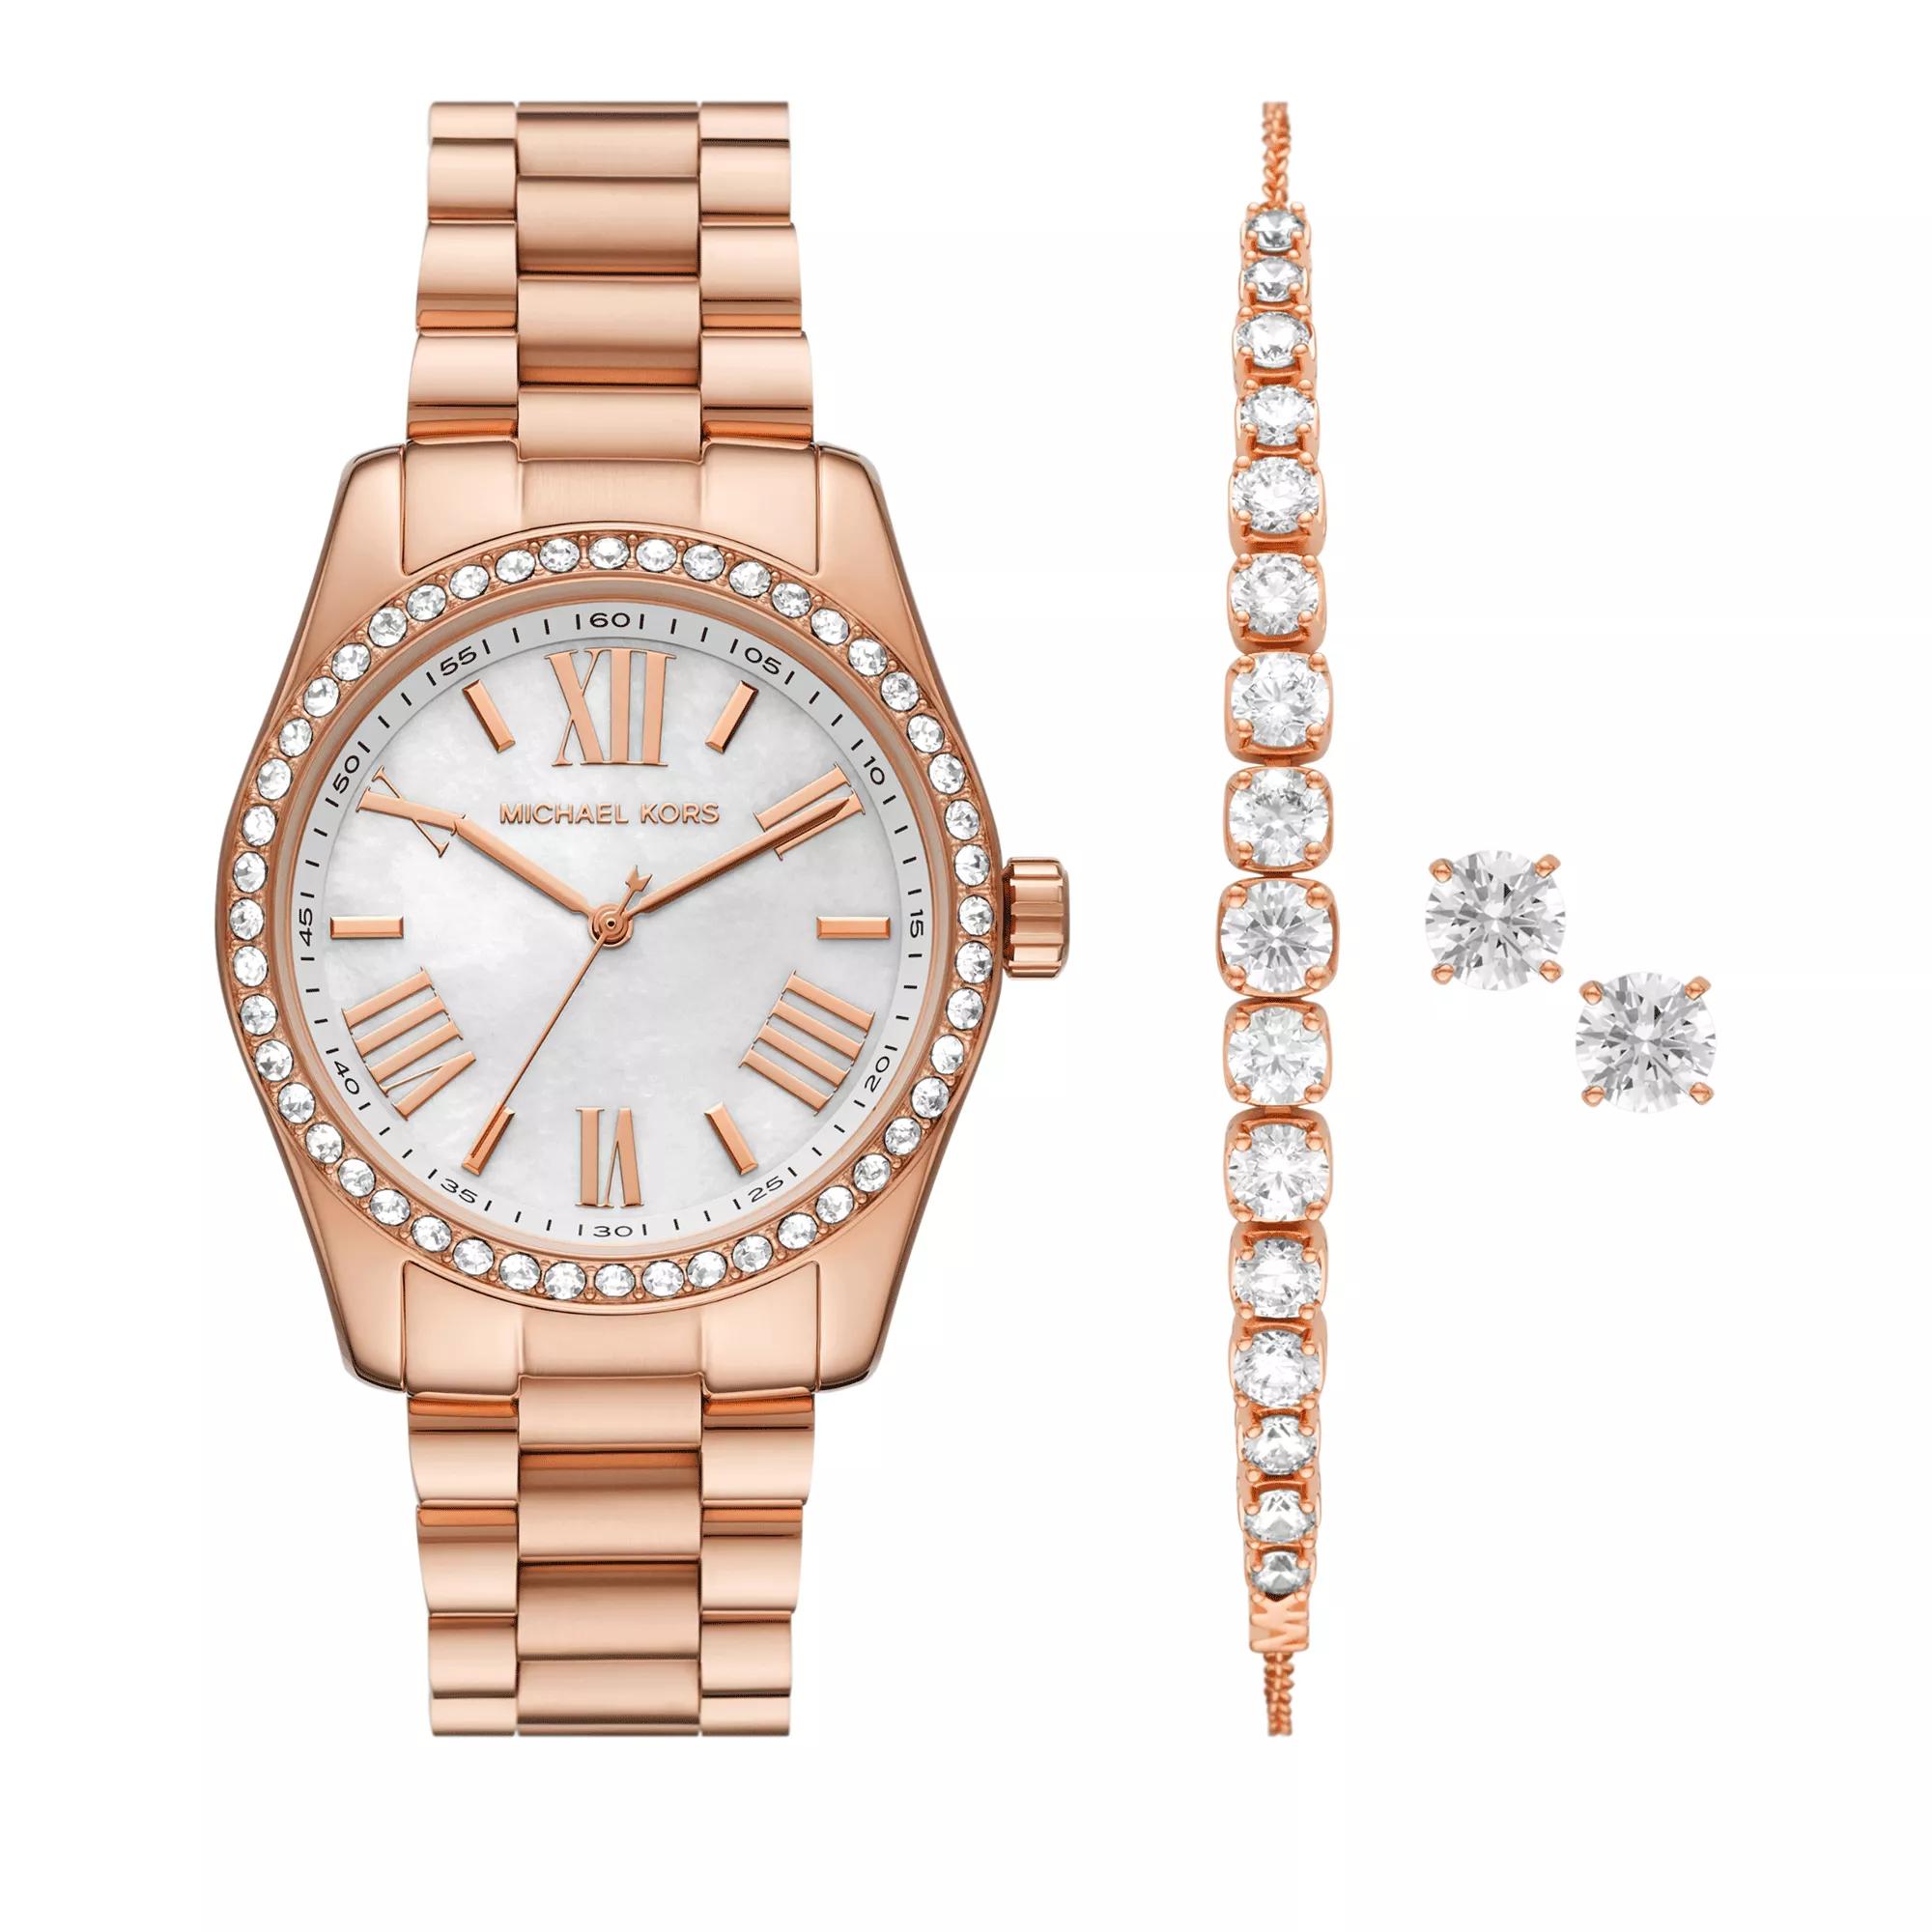 Watch | Rose Lexington Stainless Three-Hand Jewellery Steel and Quarz-Uhr Kors Gold Michael